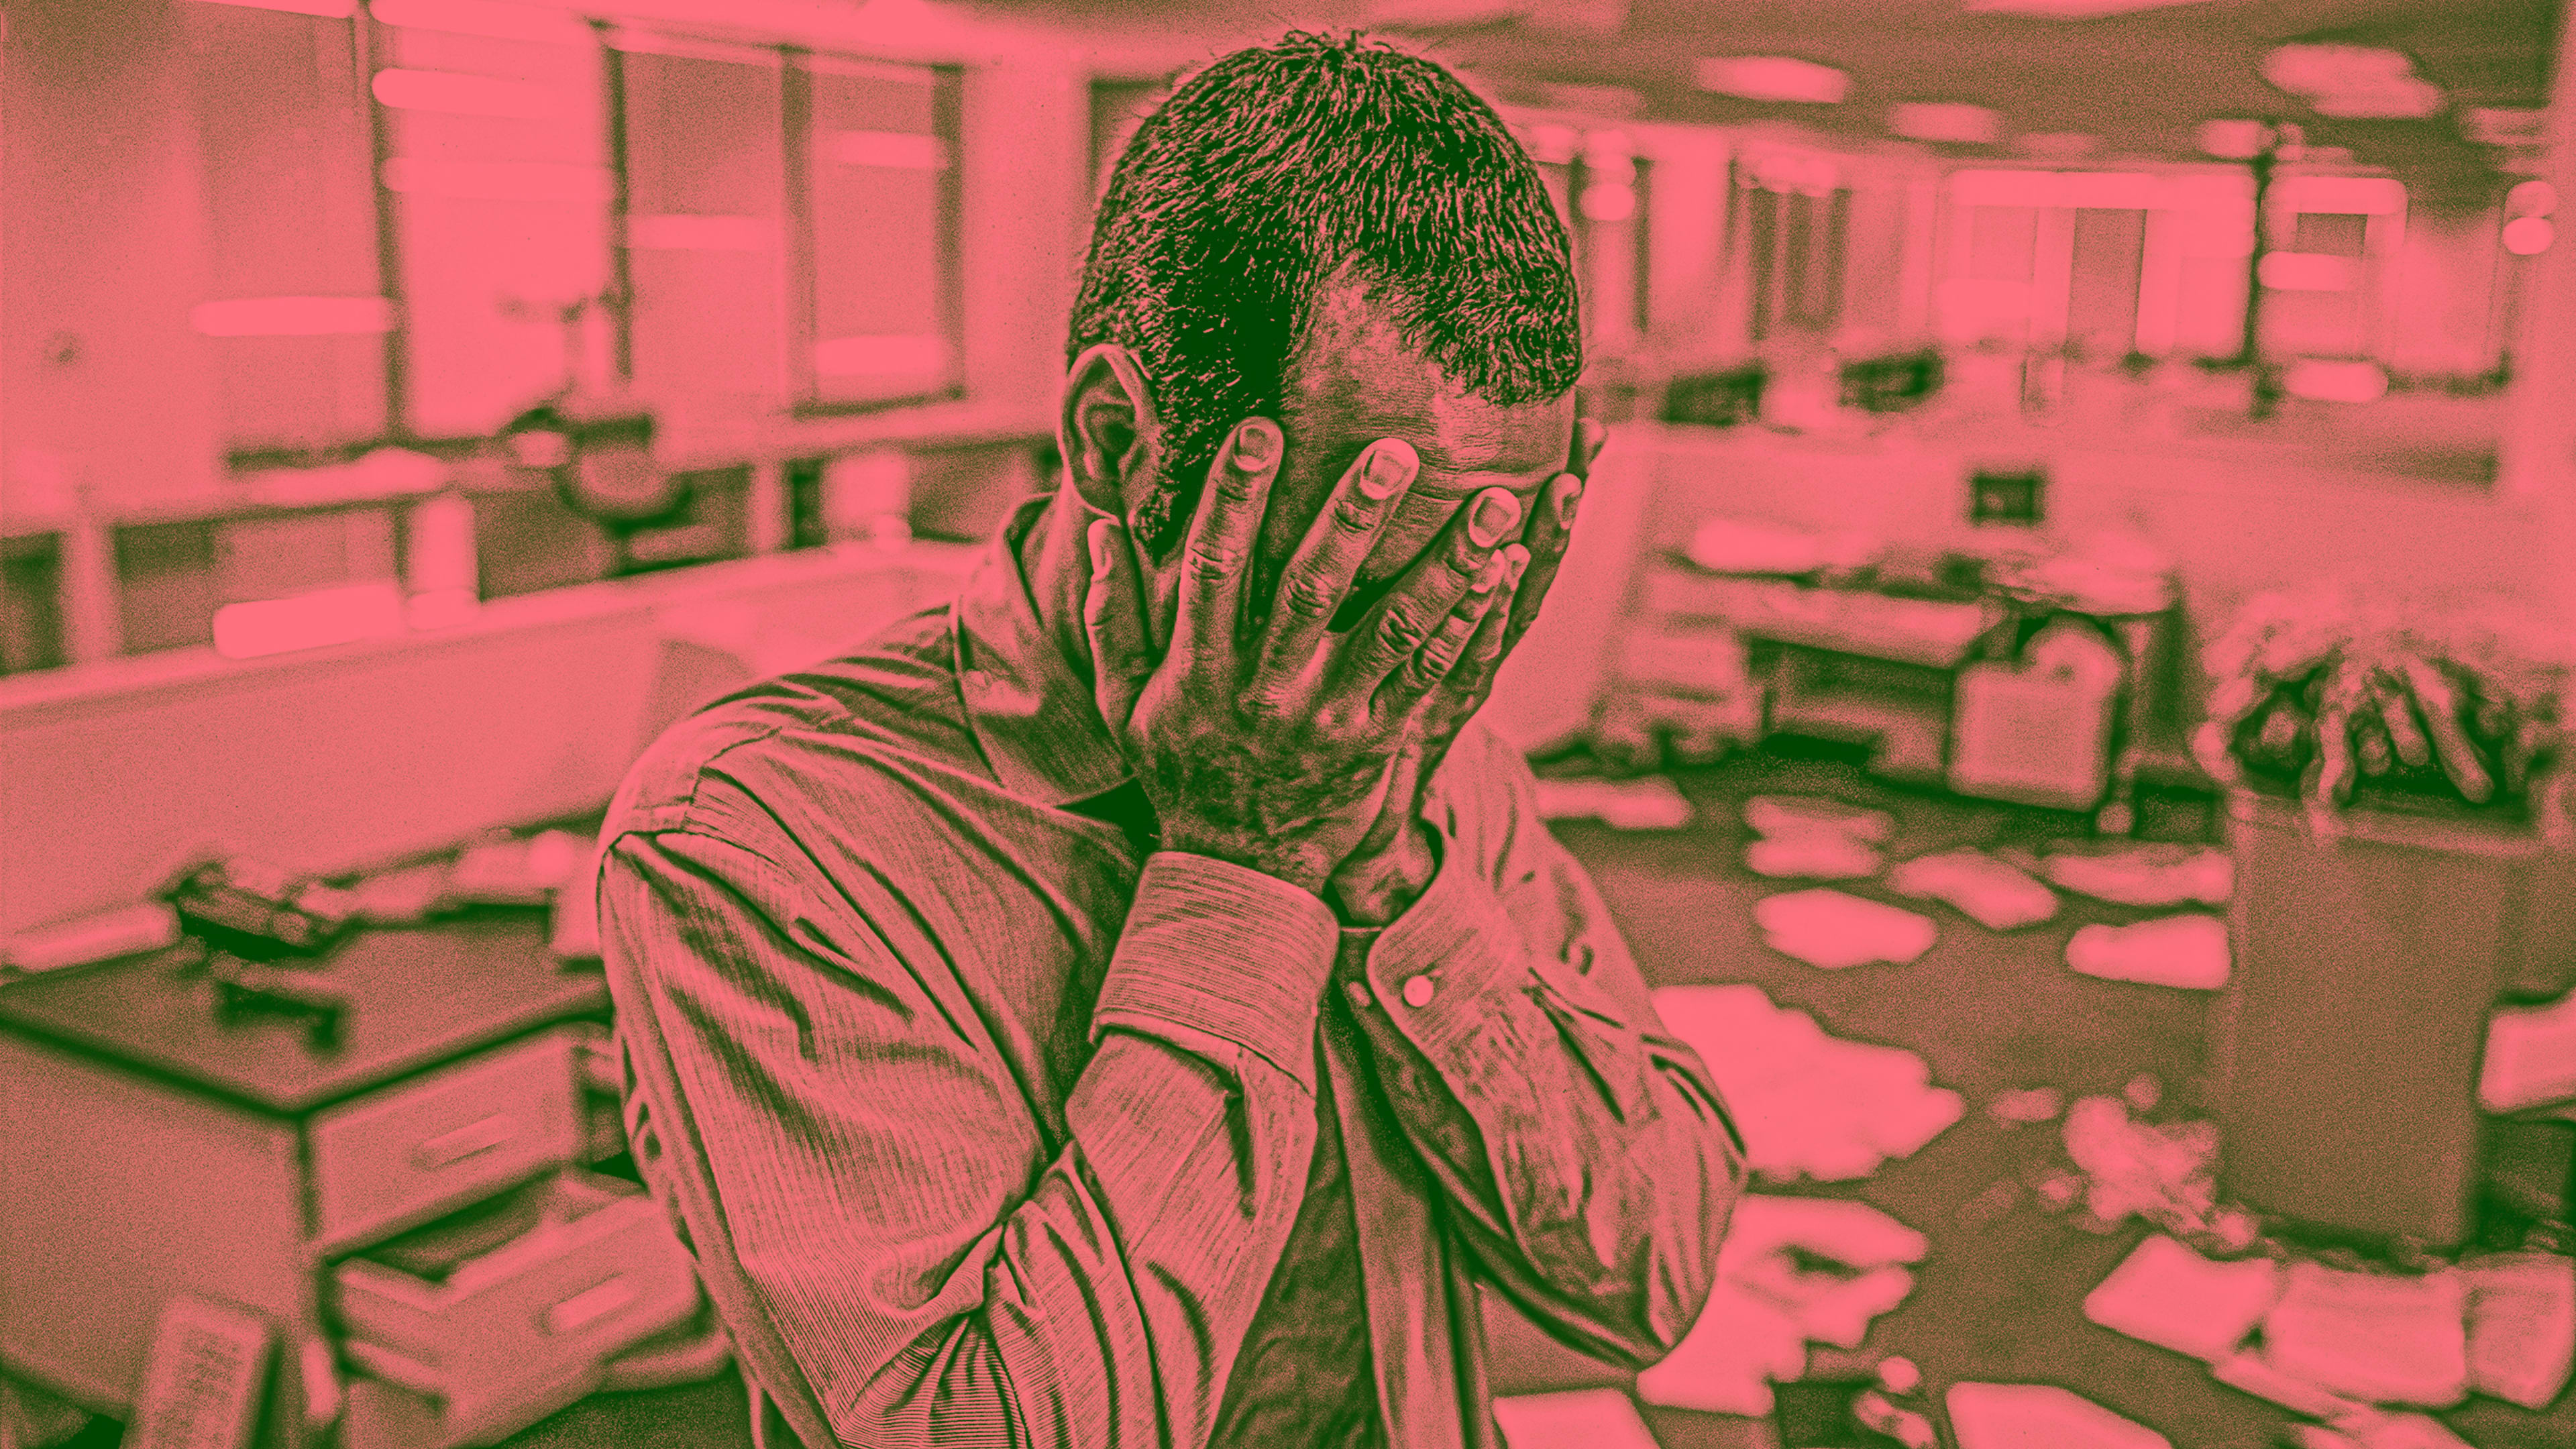 Nearly 20,000 jobs lost in another week of brutal mass layoffs for tech and media